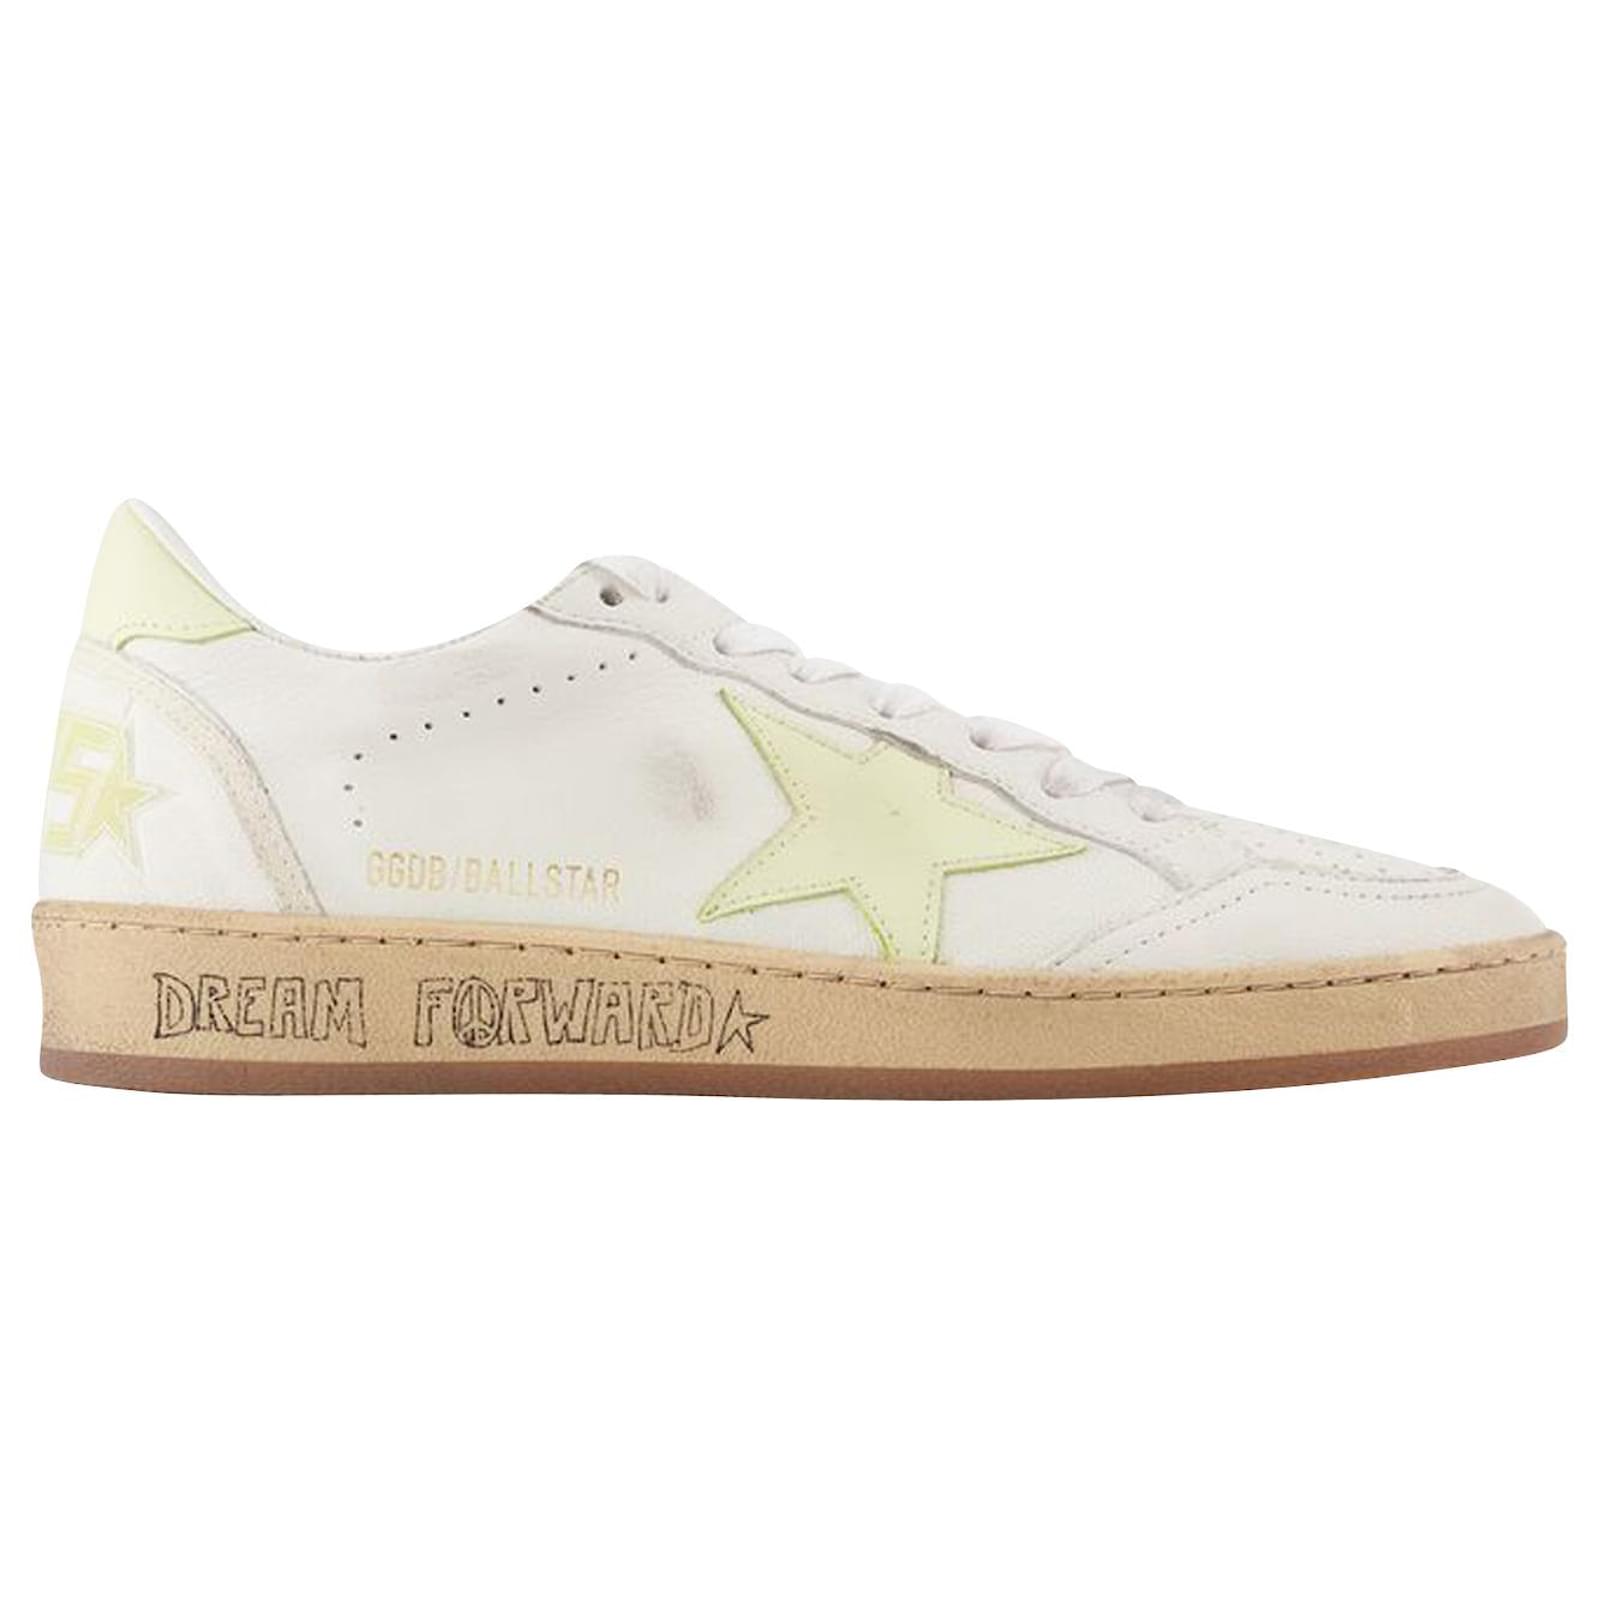 Ball Star Sneakers - Golden Goose - Light Yellow/White - Leather